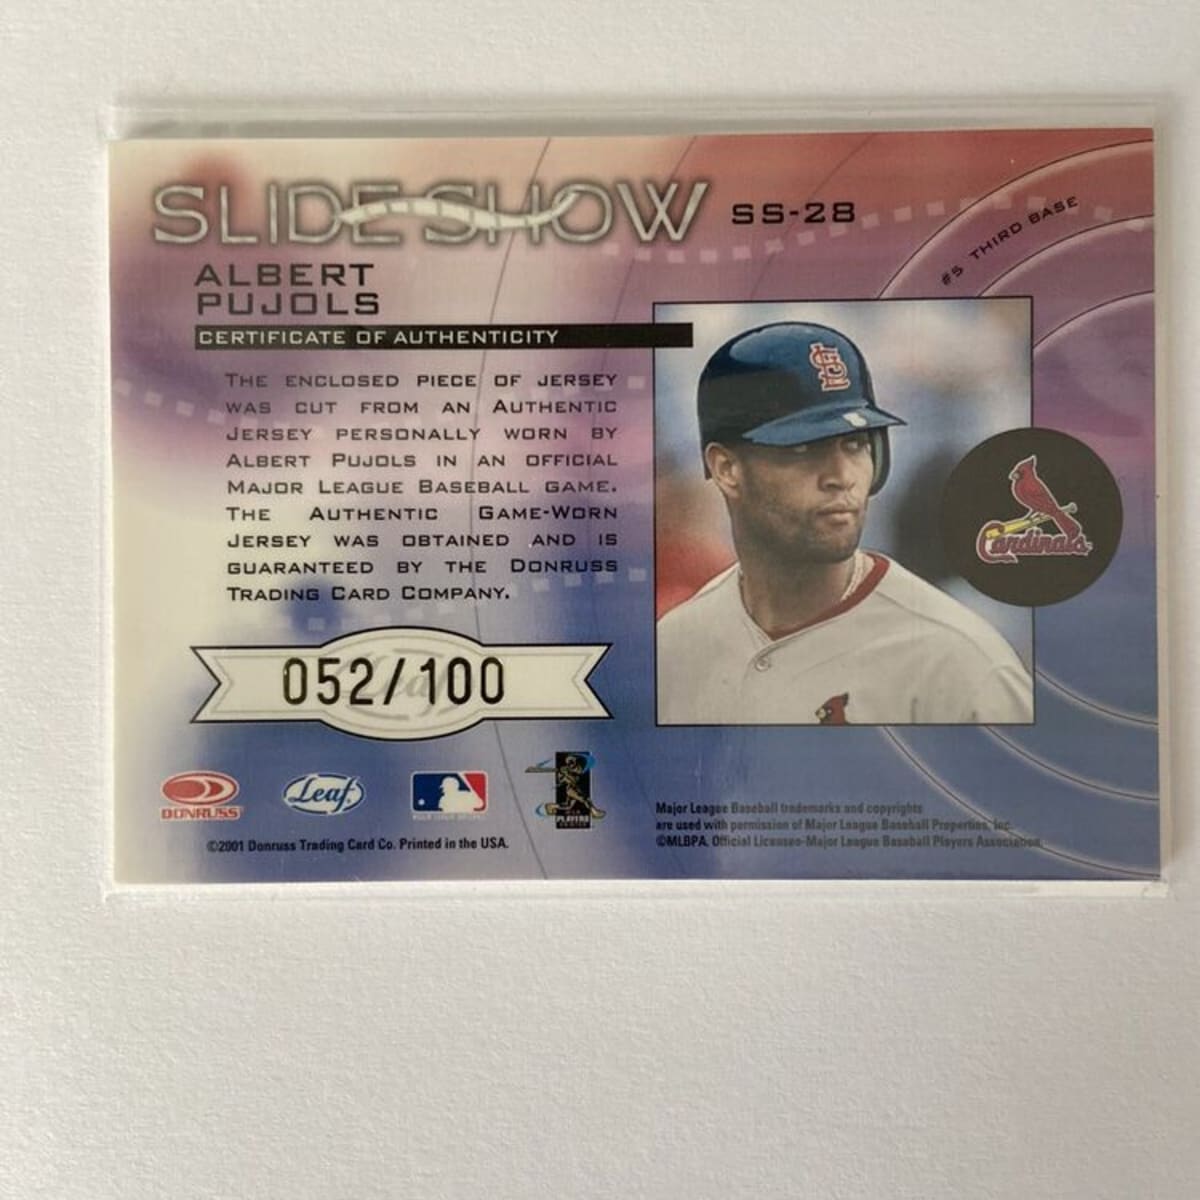 Albert Pujols Sports Card Sets New Record with $5,000 List Price - Sports  Illustrated Collectibles News, Analysis and More